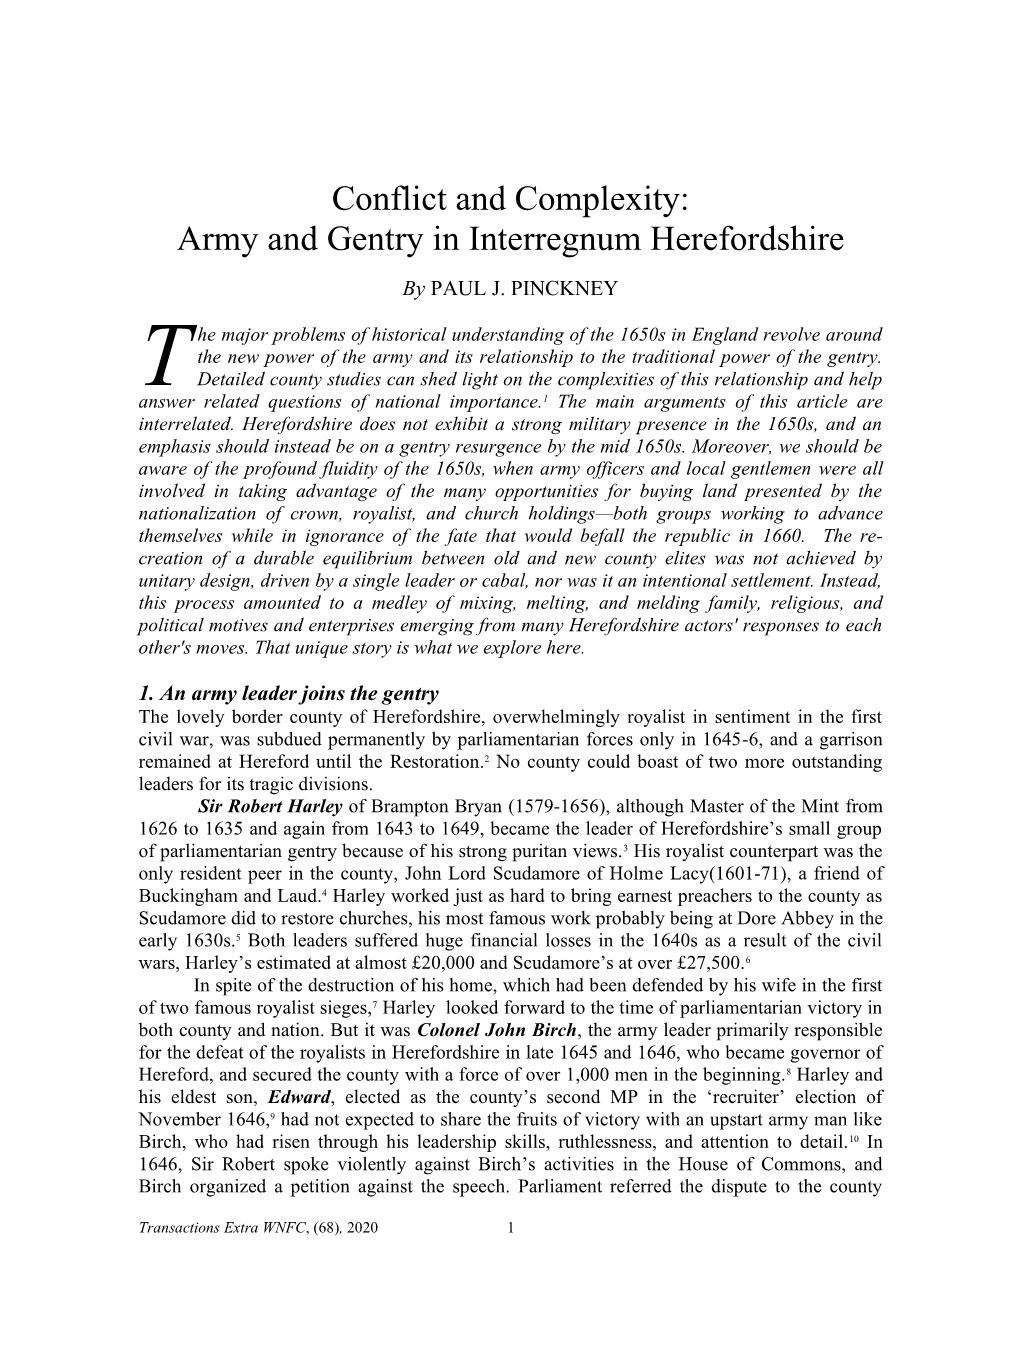 Conflict and Complexity: Army and Gentry in Interregnum Herefordshire